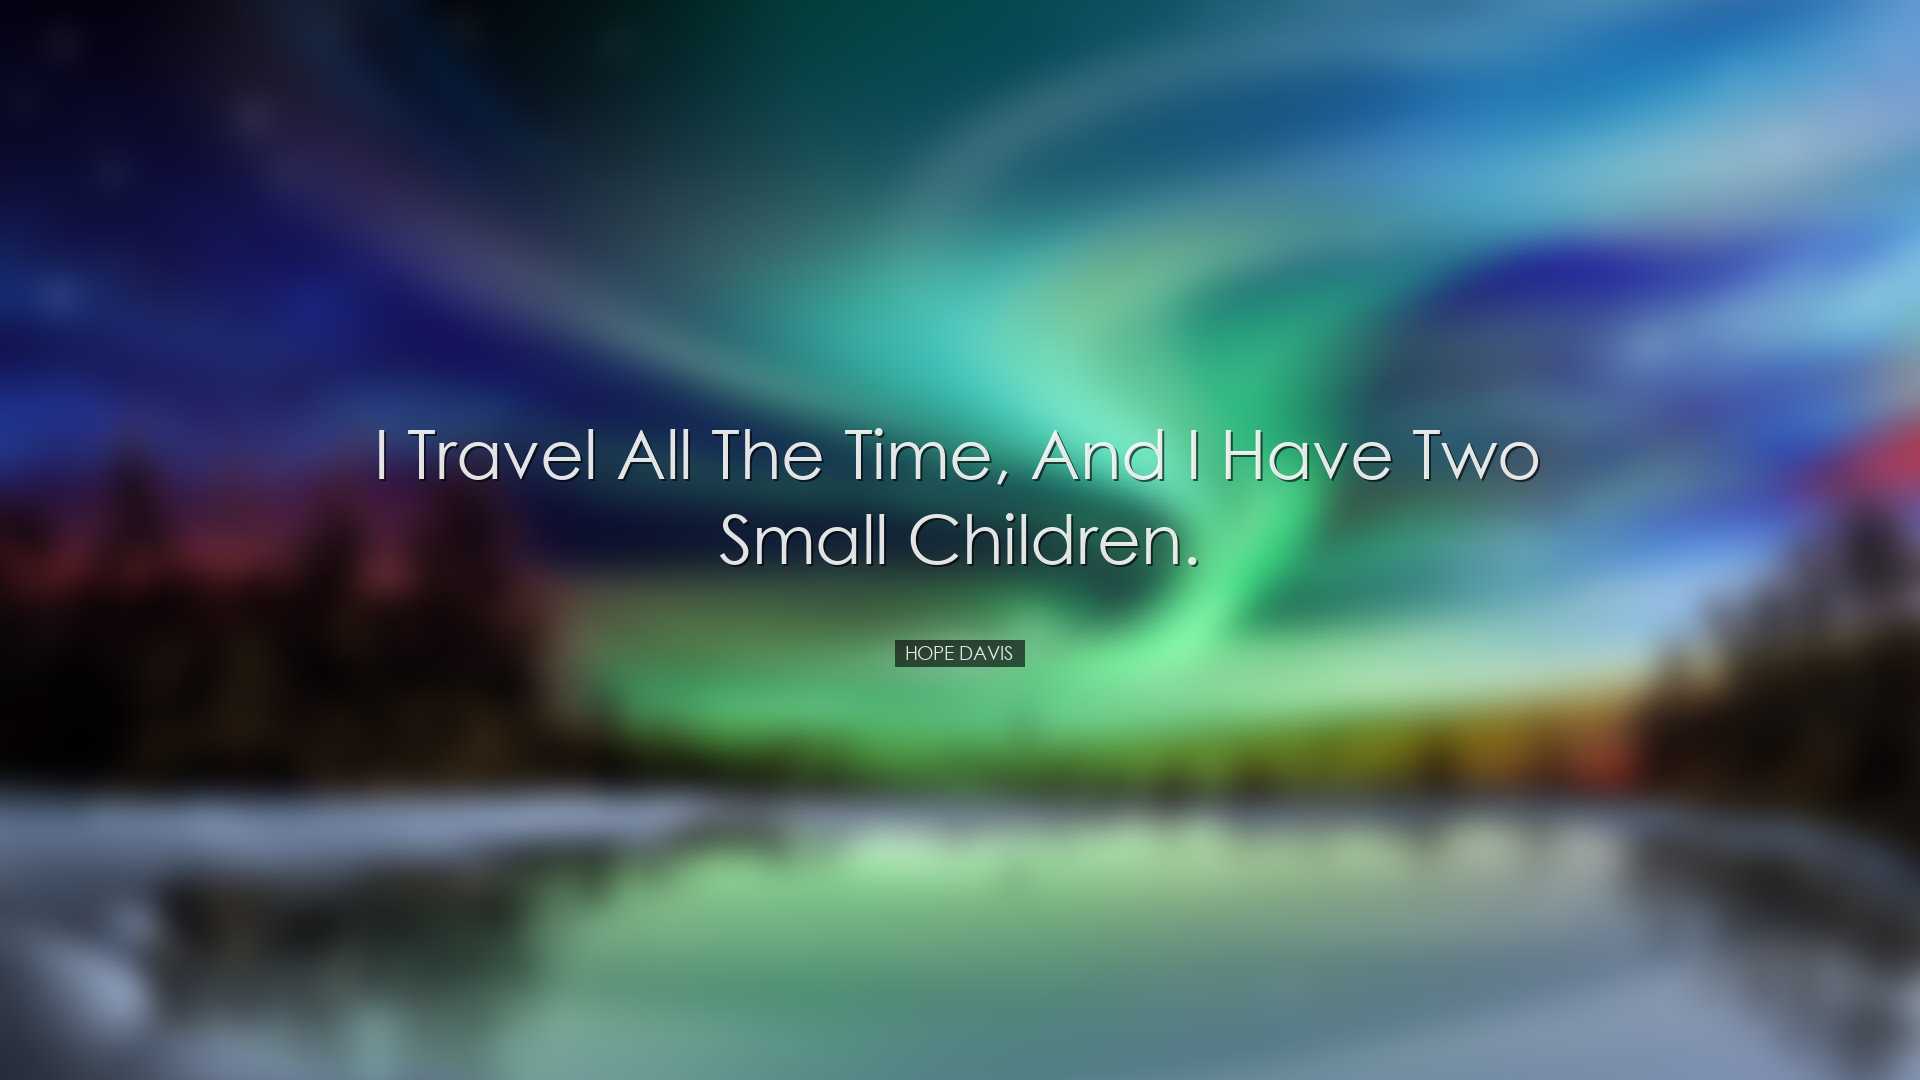 I travel all the time, and I have two small children. - Hope Davis